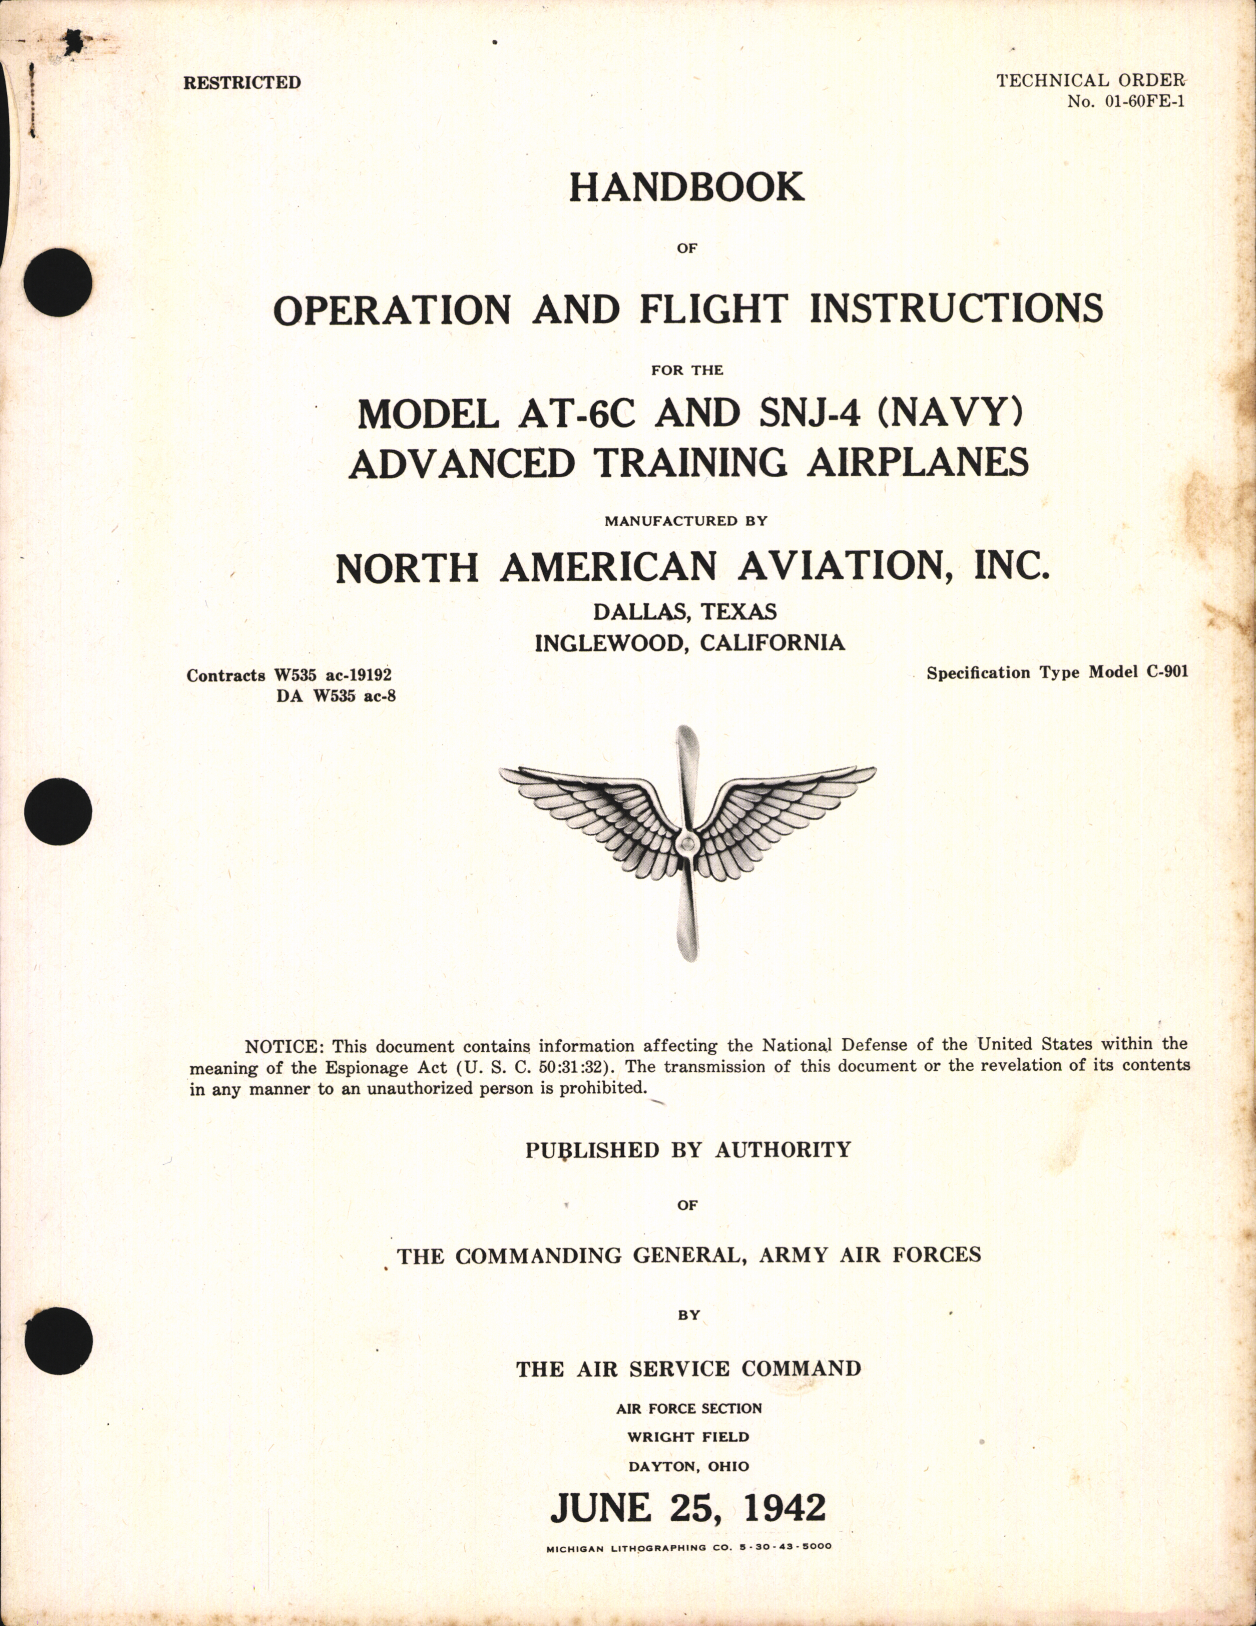 Sample page 1 from AirCorps Library document: Operation and Flight Instructions for AT-6C and SNJ-4 Training Airplanes